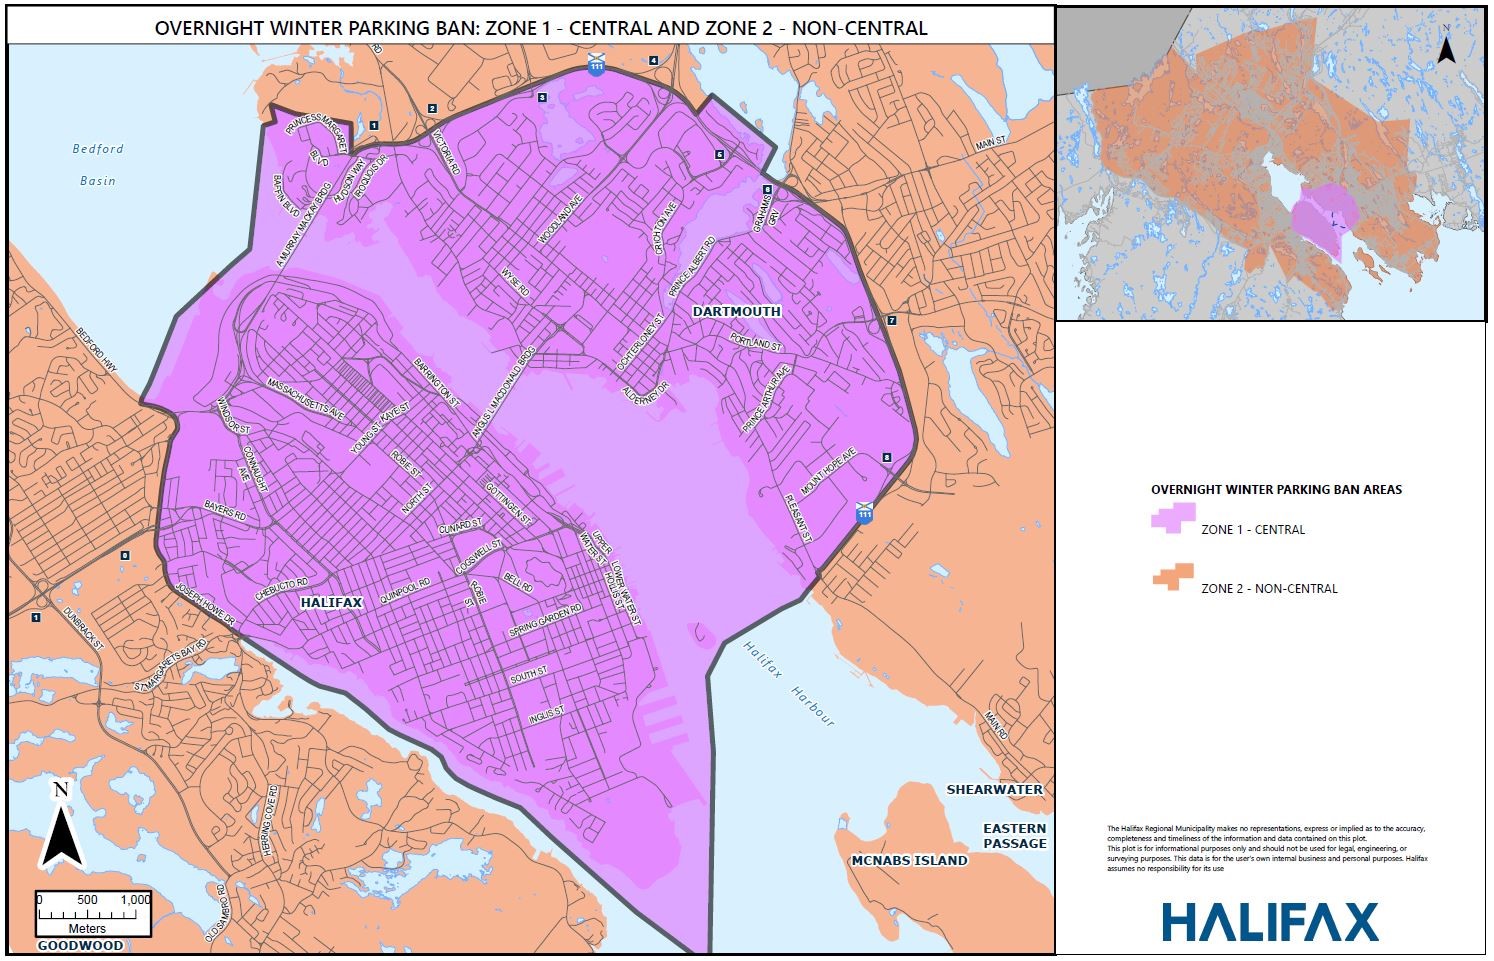 A map that shows the two parking ban zones. Zone 1 is Halifax peninsula and Dartmouth on the inside of the Circ. Zone 2 is all other areas.